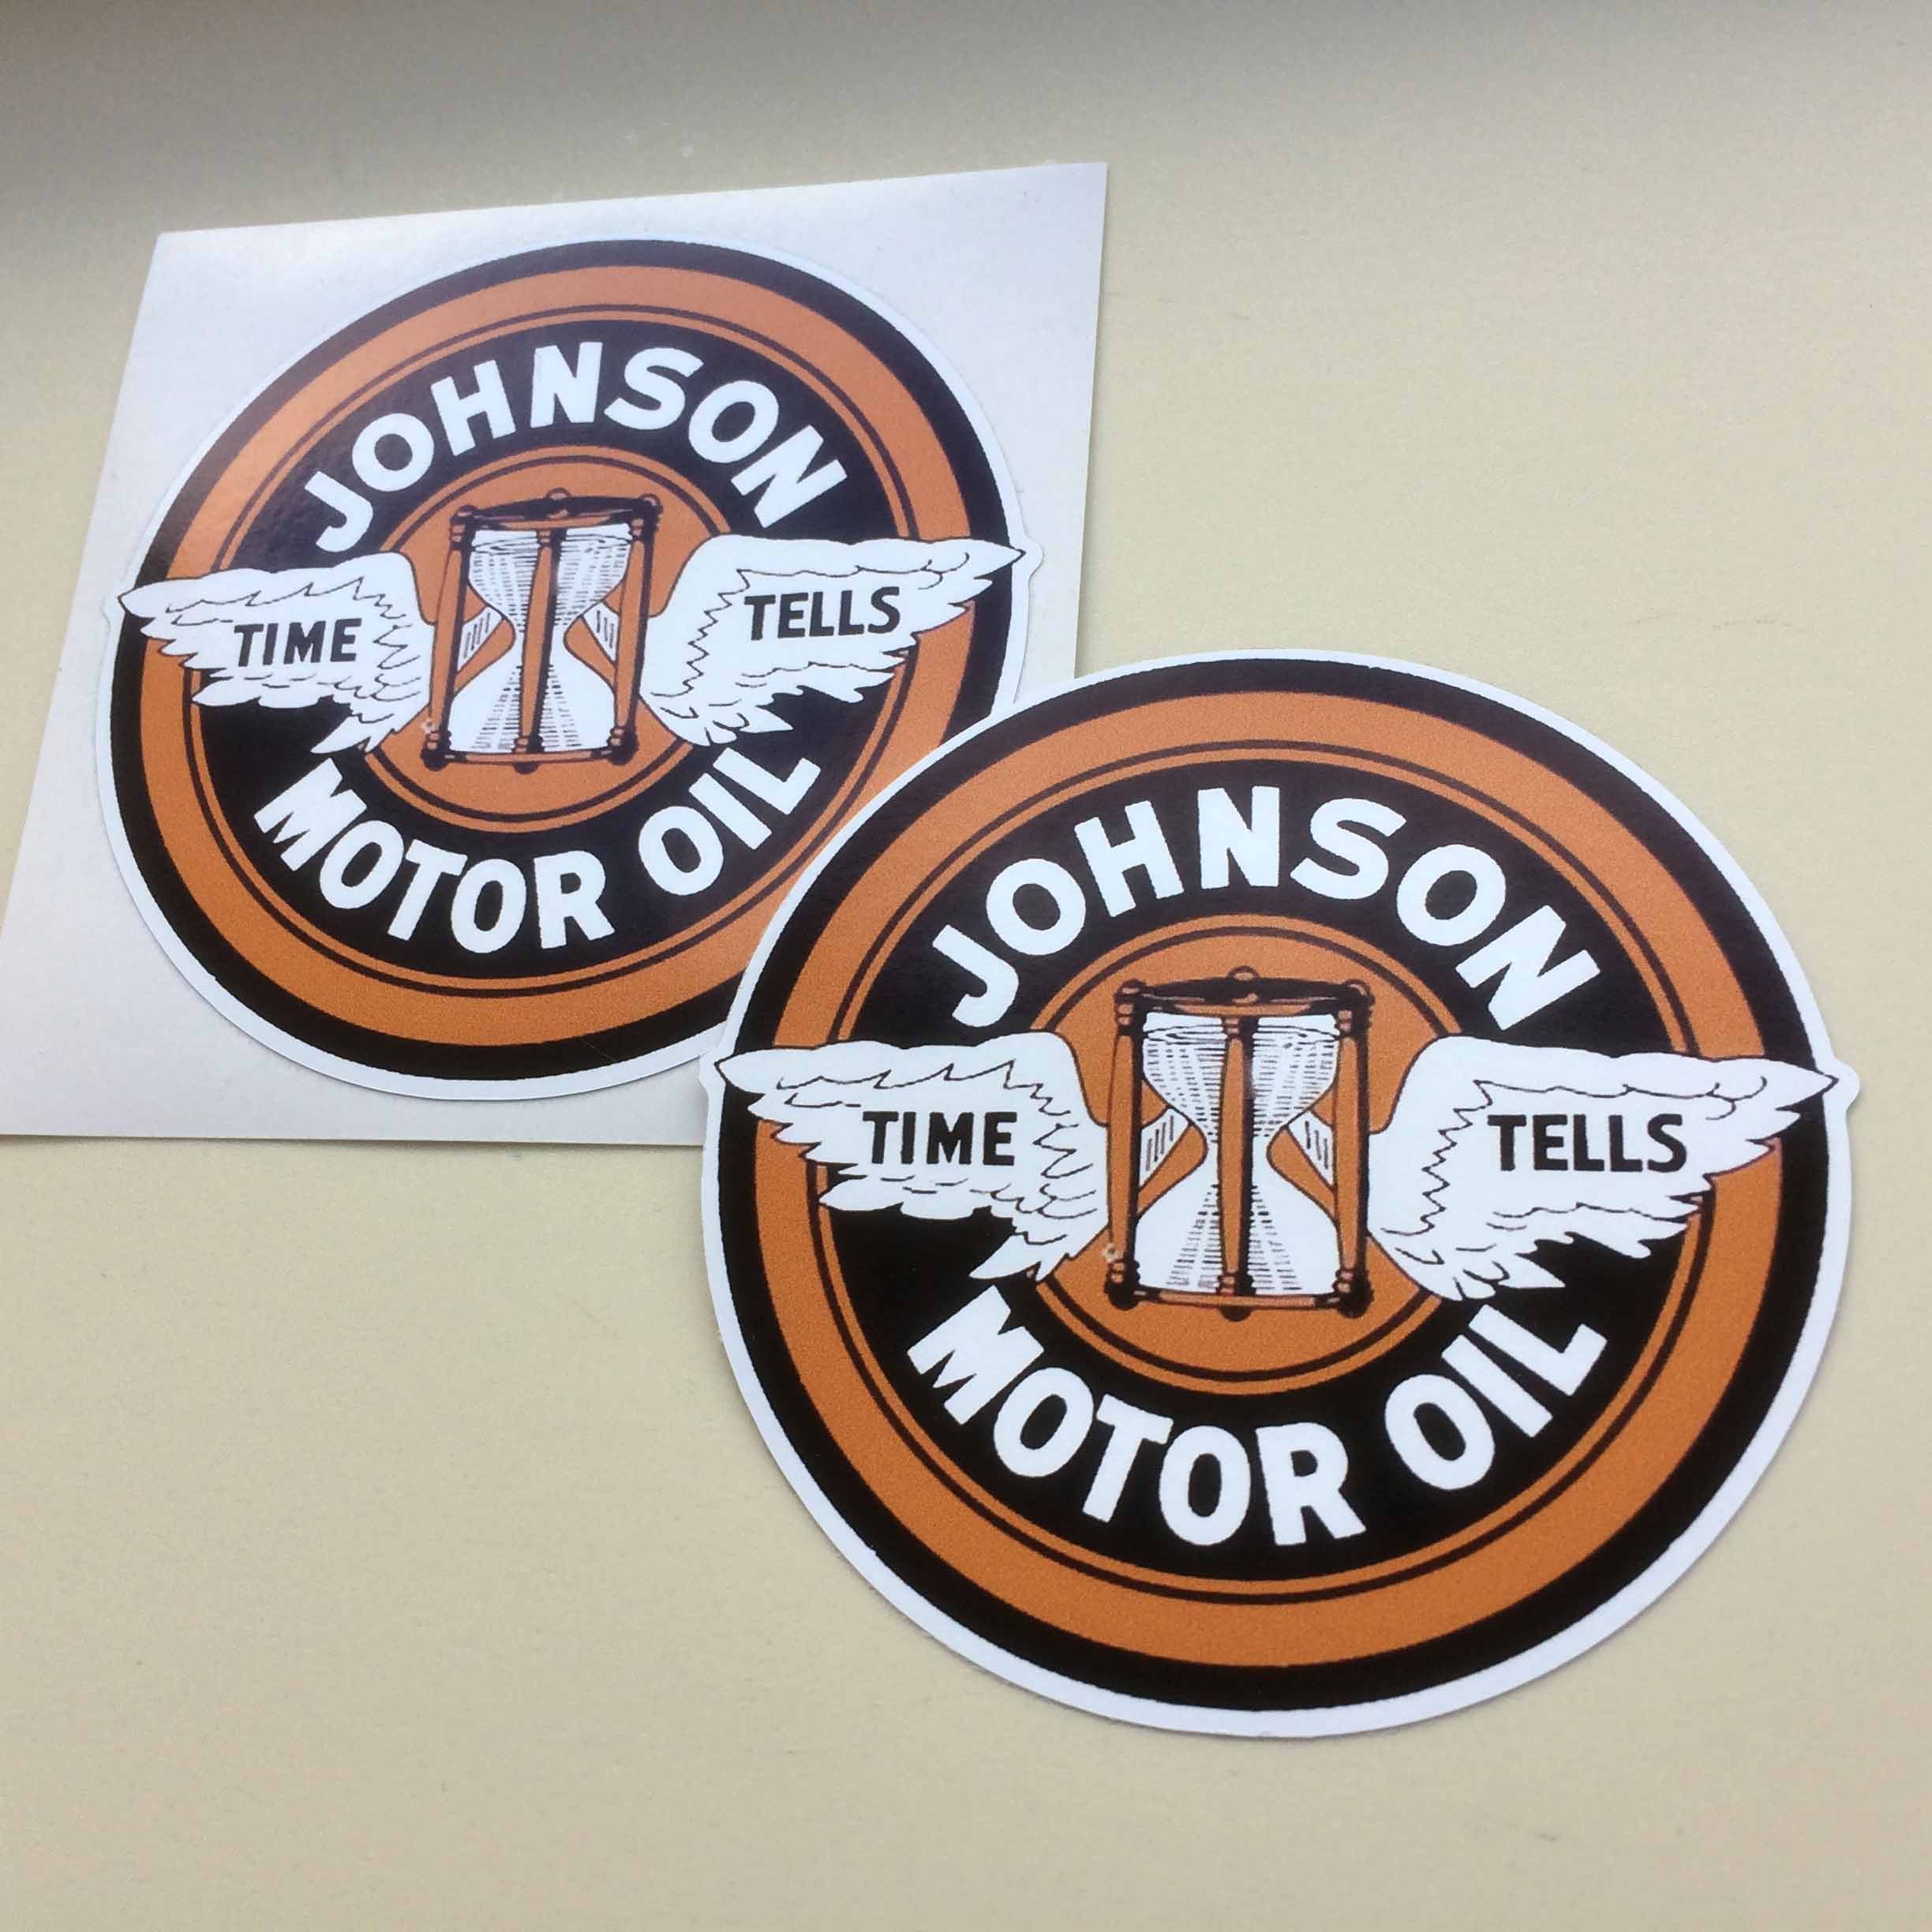 Johnson Motor Oil in white lettering surrounds an hourglass with white wings emblazoned with Time Tells. On a background of concentric circles in brown and black.